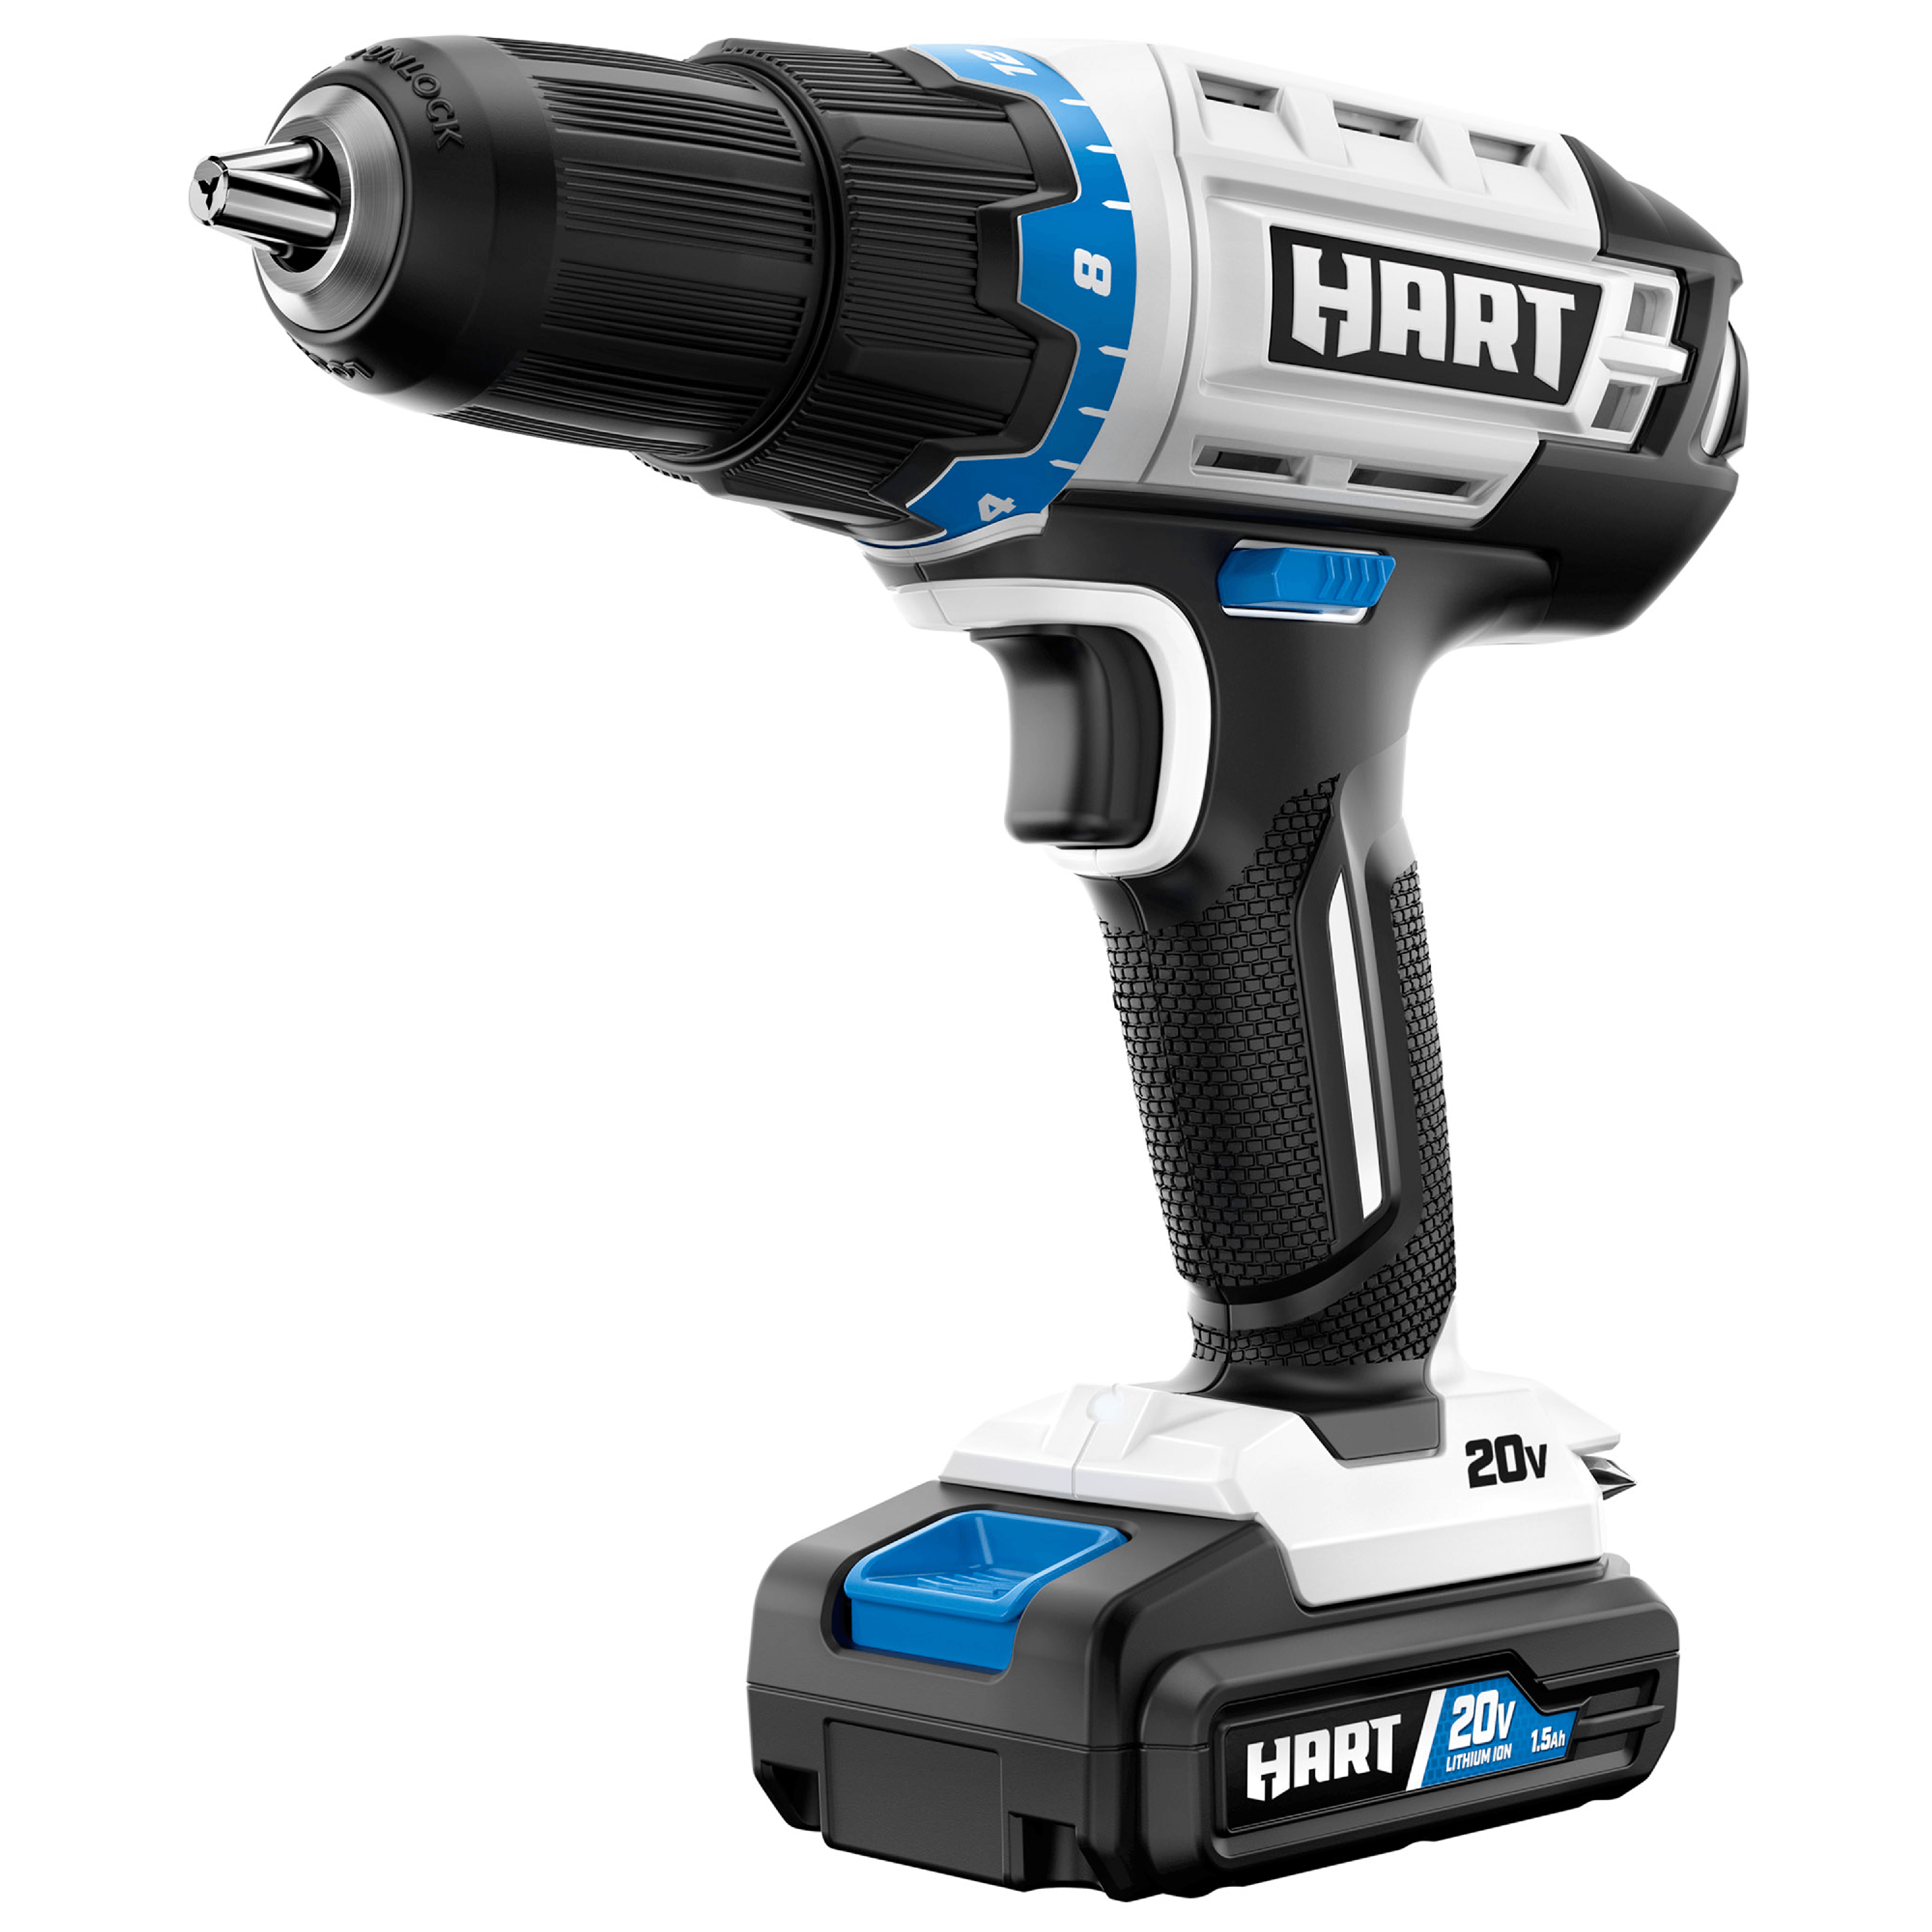 HART 20-Volt Cordless 1/2-inch Drill/Driver Kit (1) 1.5Ah Lithium-Ion Battery - image 1 of 17